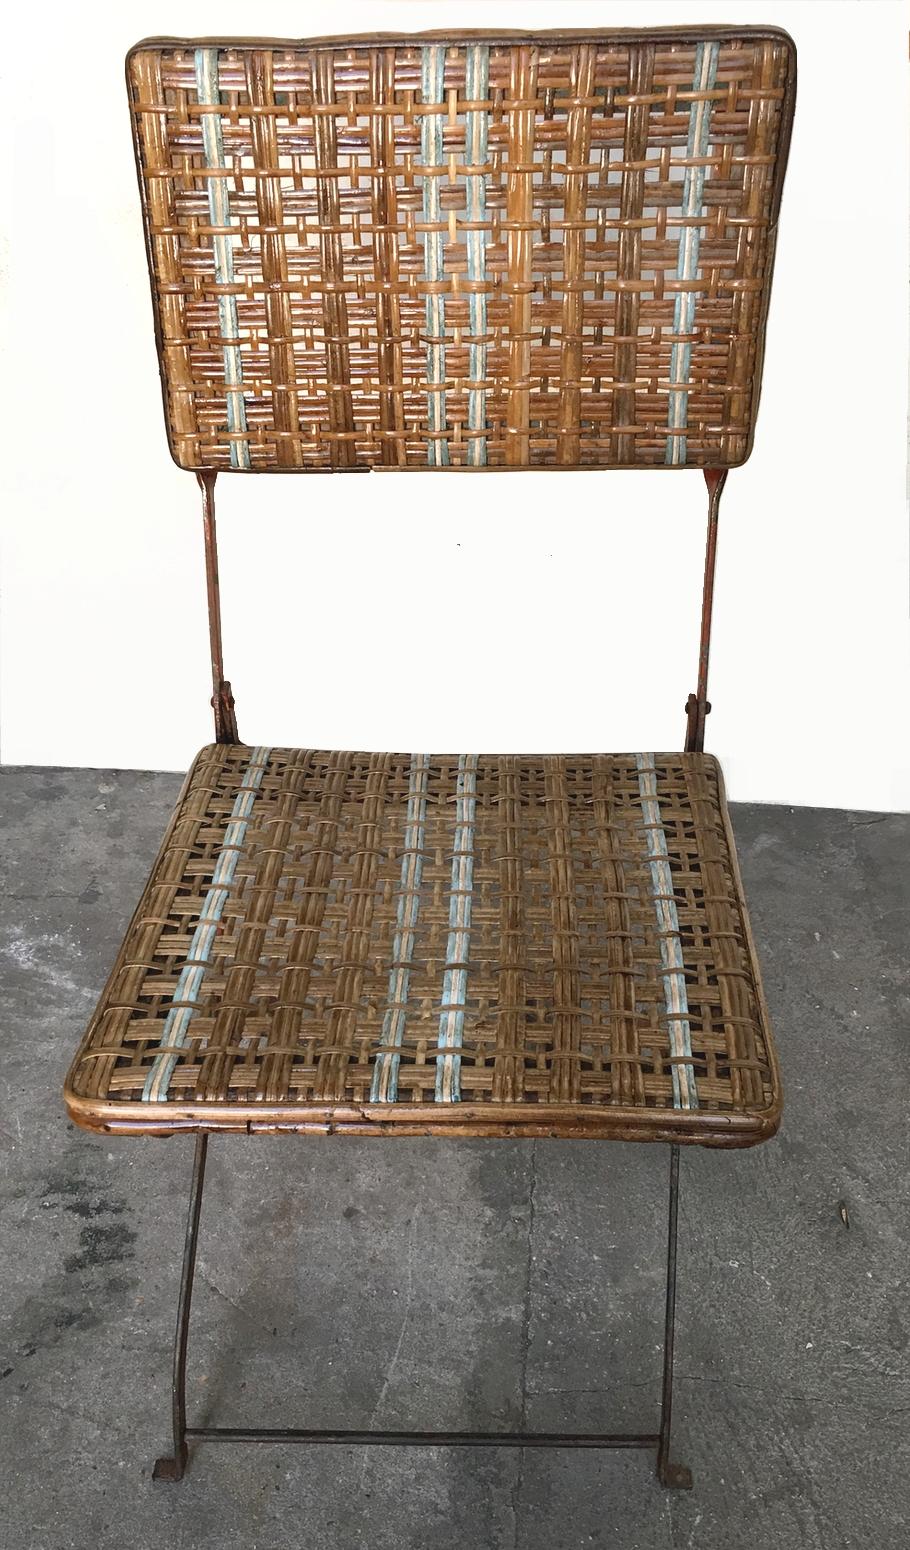 Set of eleven folding winter garden chairs, made of wrought iron and rattan with strands of painted rattan.
France circa 1900.
  